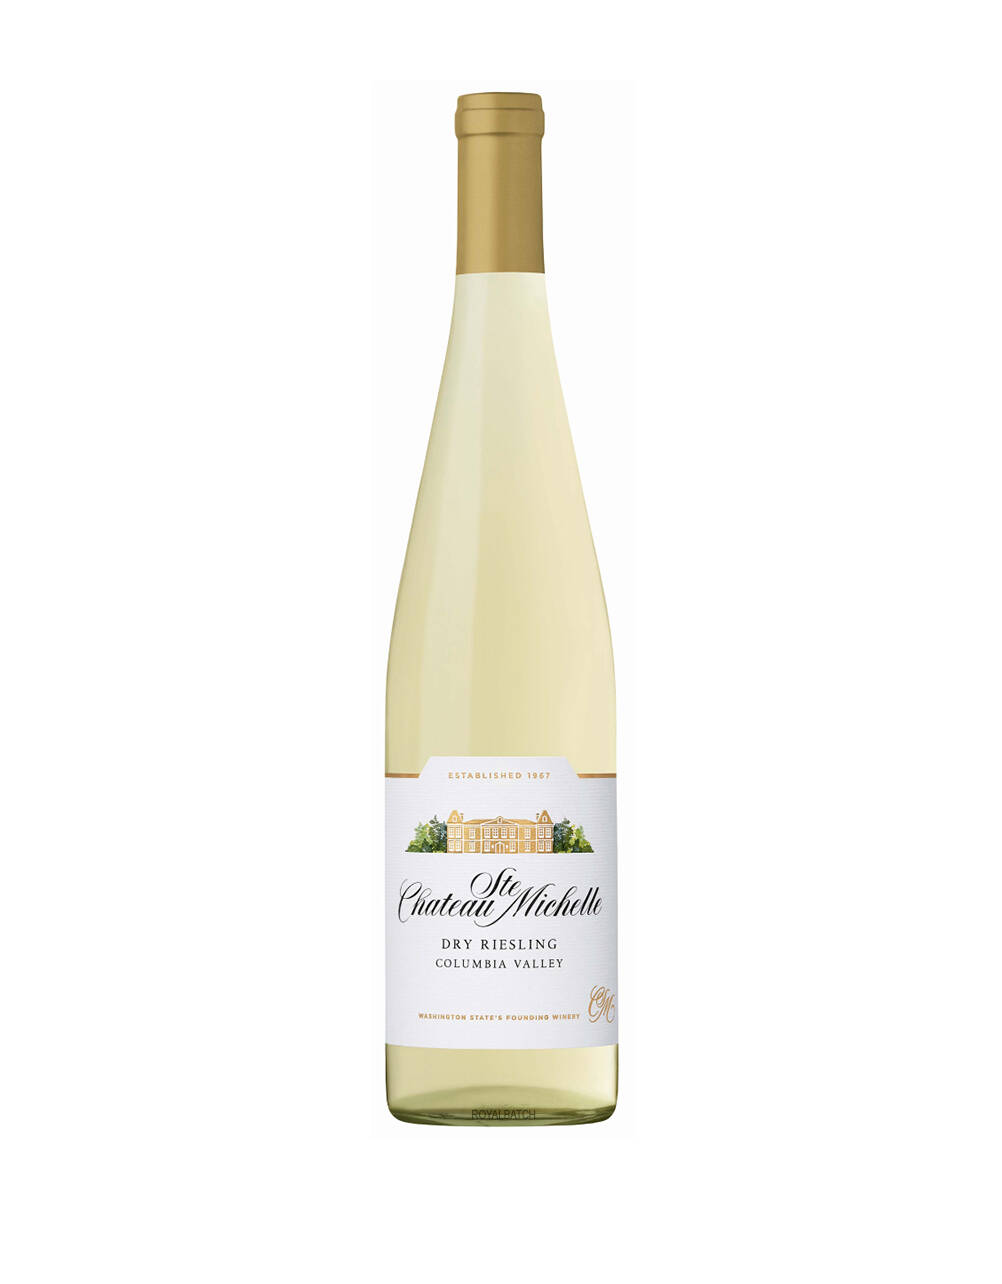 Chateau Ste Michelle Dry Riesling Wine